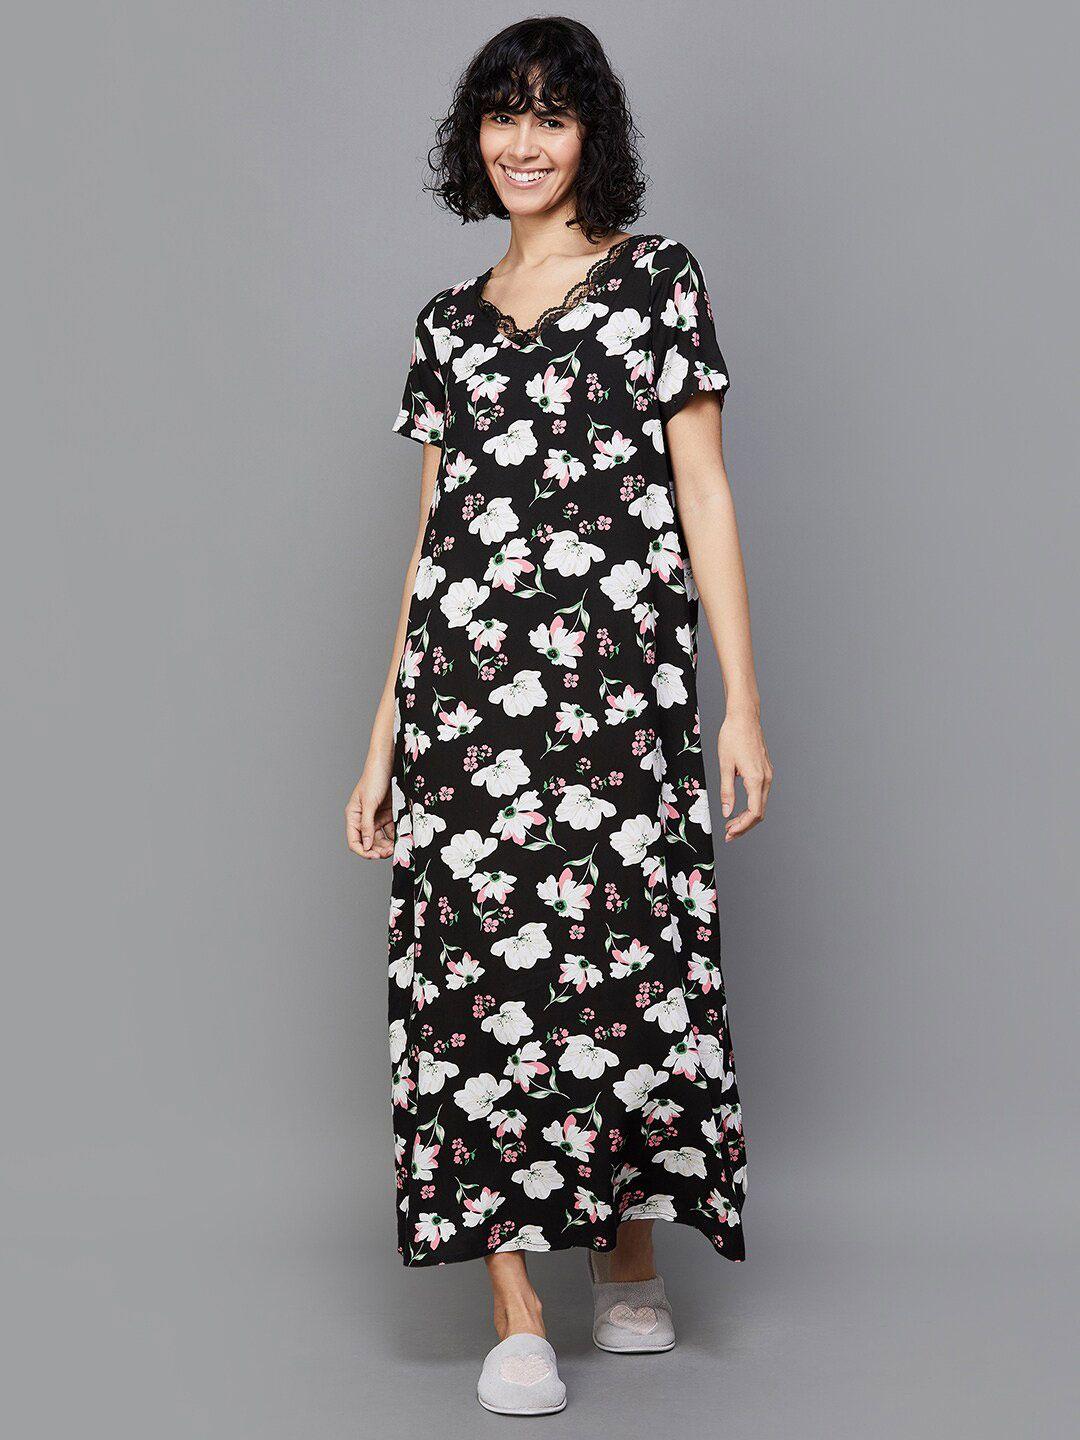 ginger-by-lifestyle-floral-print-a-line-dress